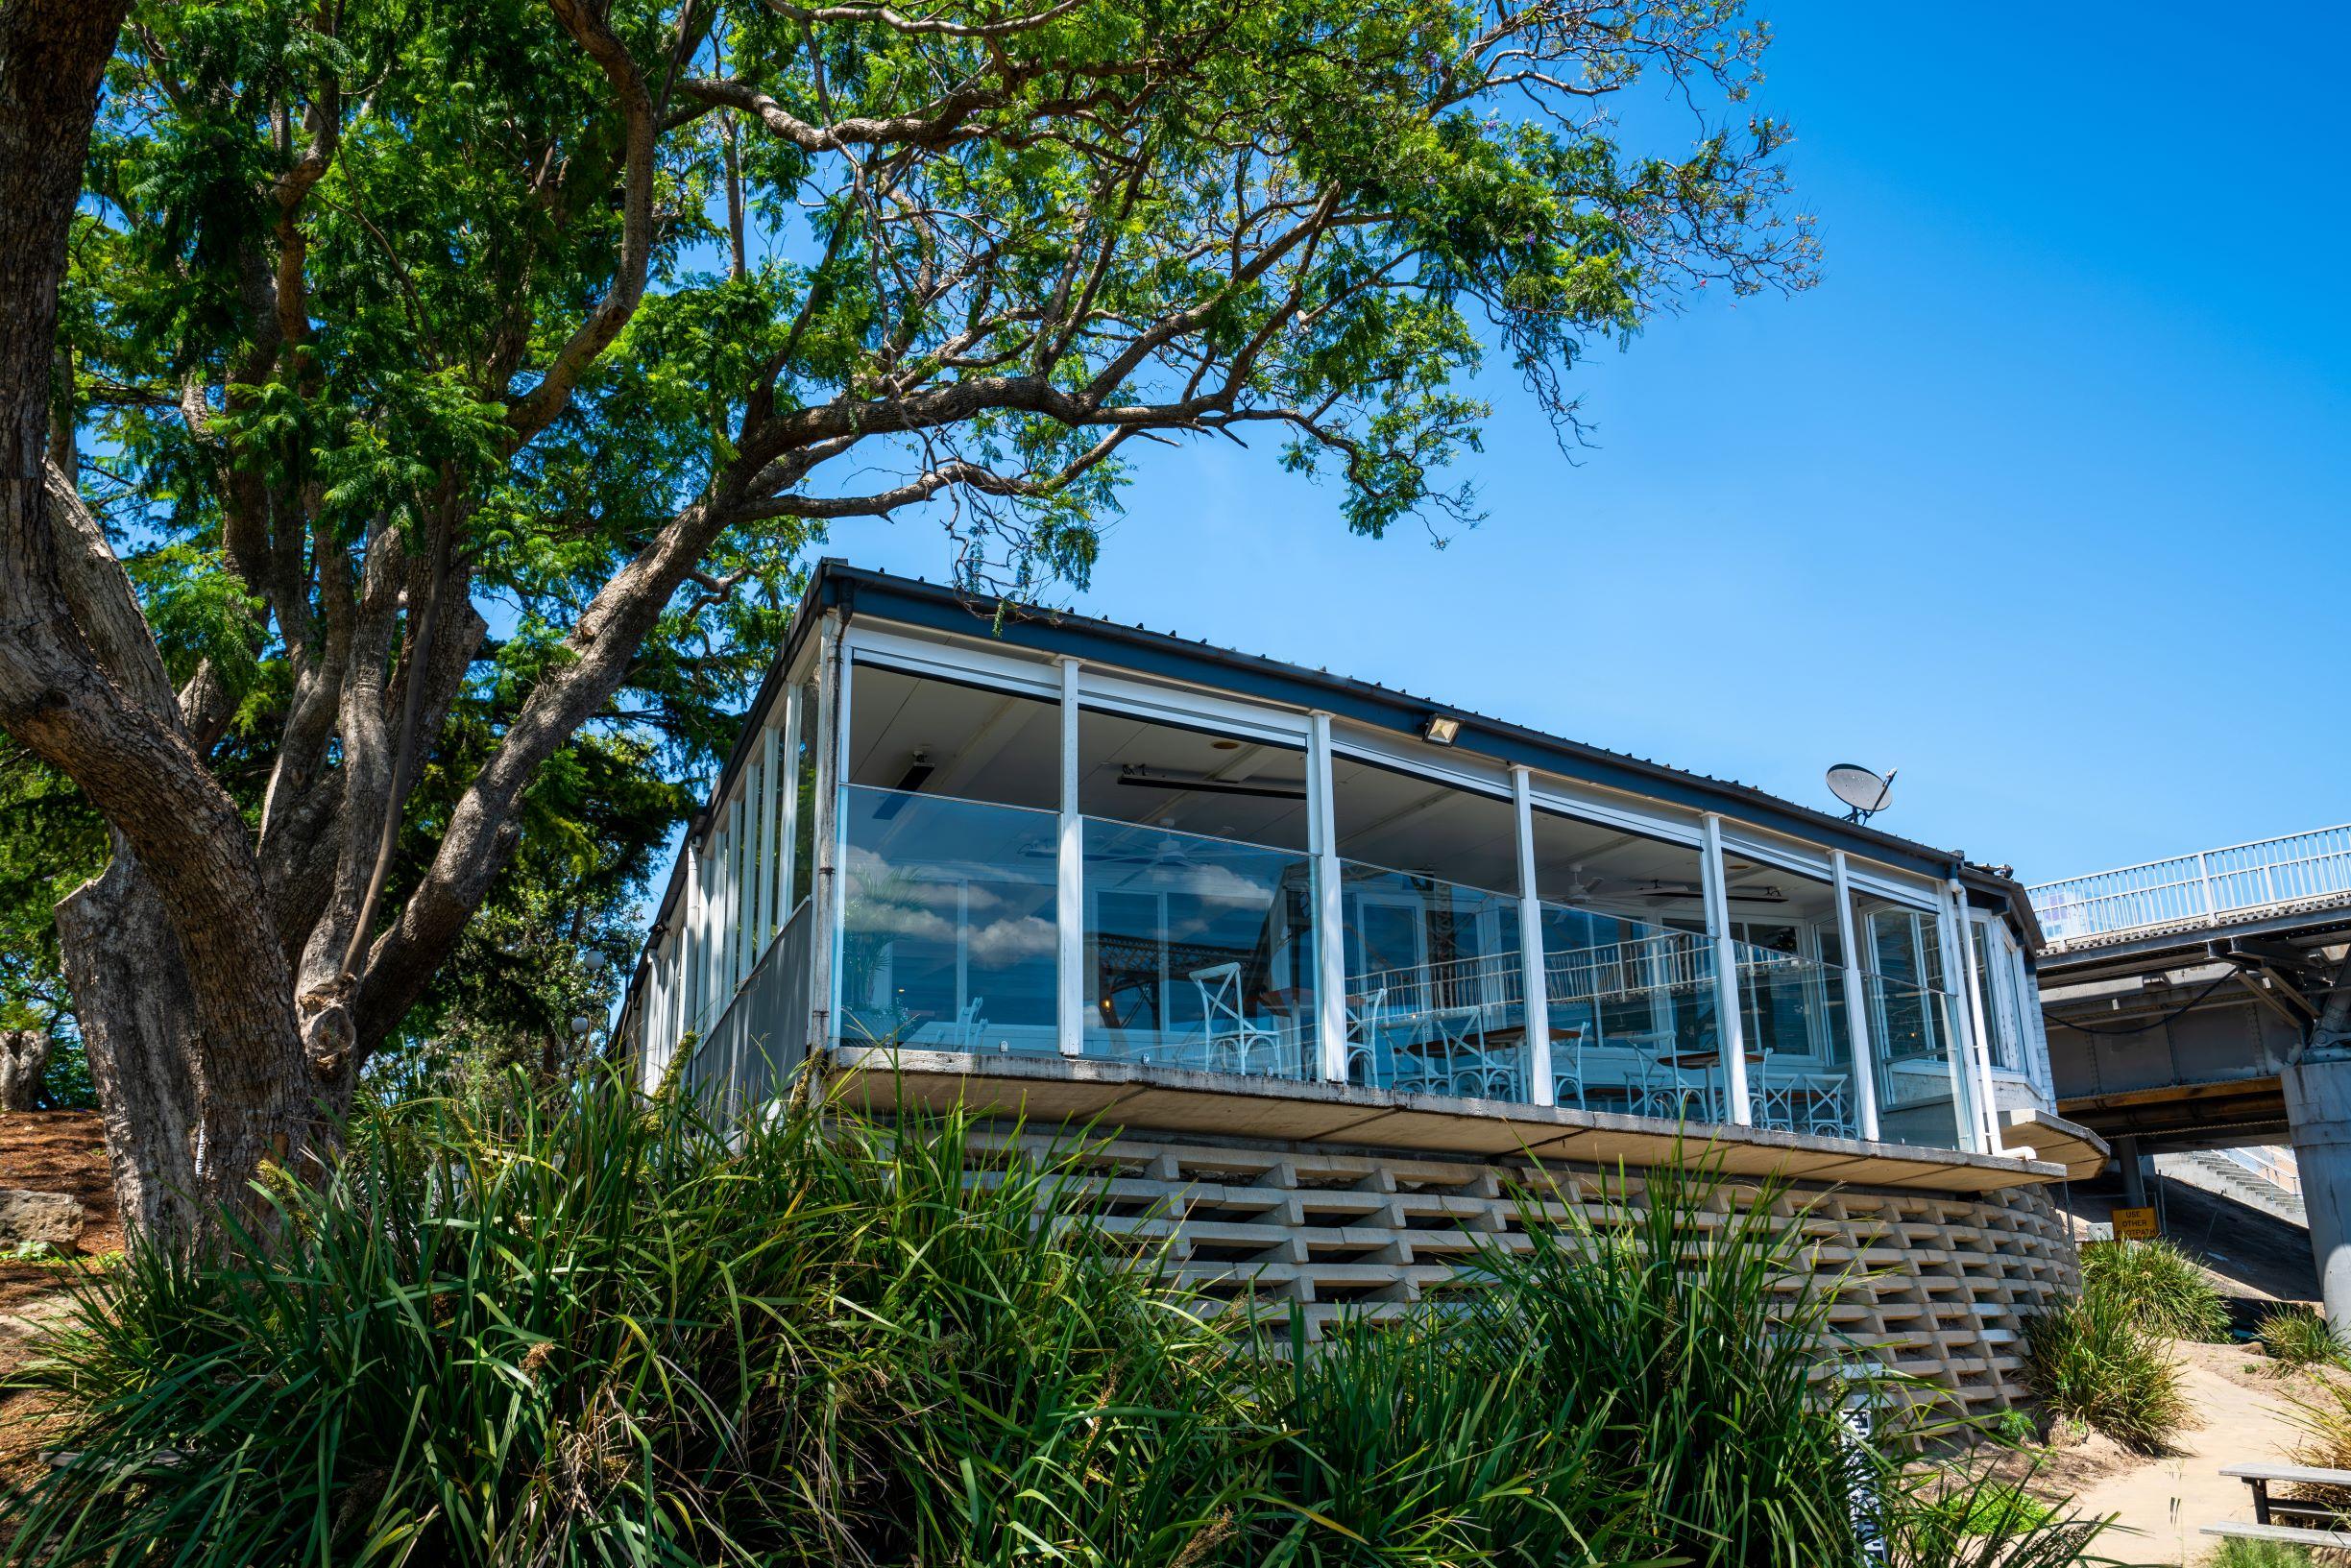 Ponte Bar and Dining is located along the Shoalhaven River